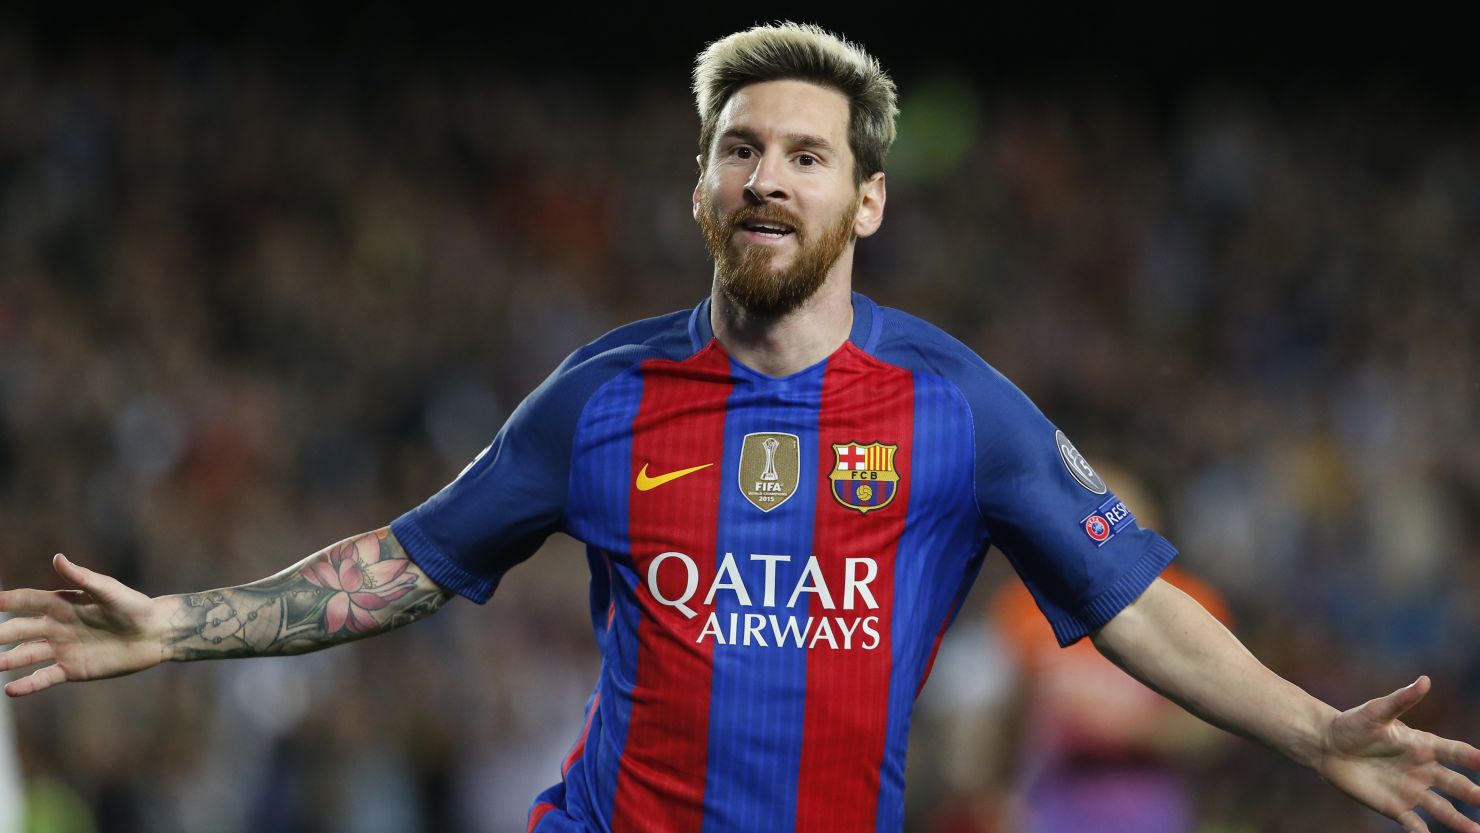 Lionel Messi's Barcelona beat PSG in the 2015 Champions League quarterfinals.